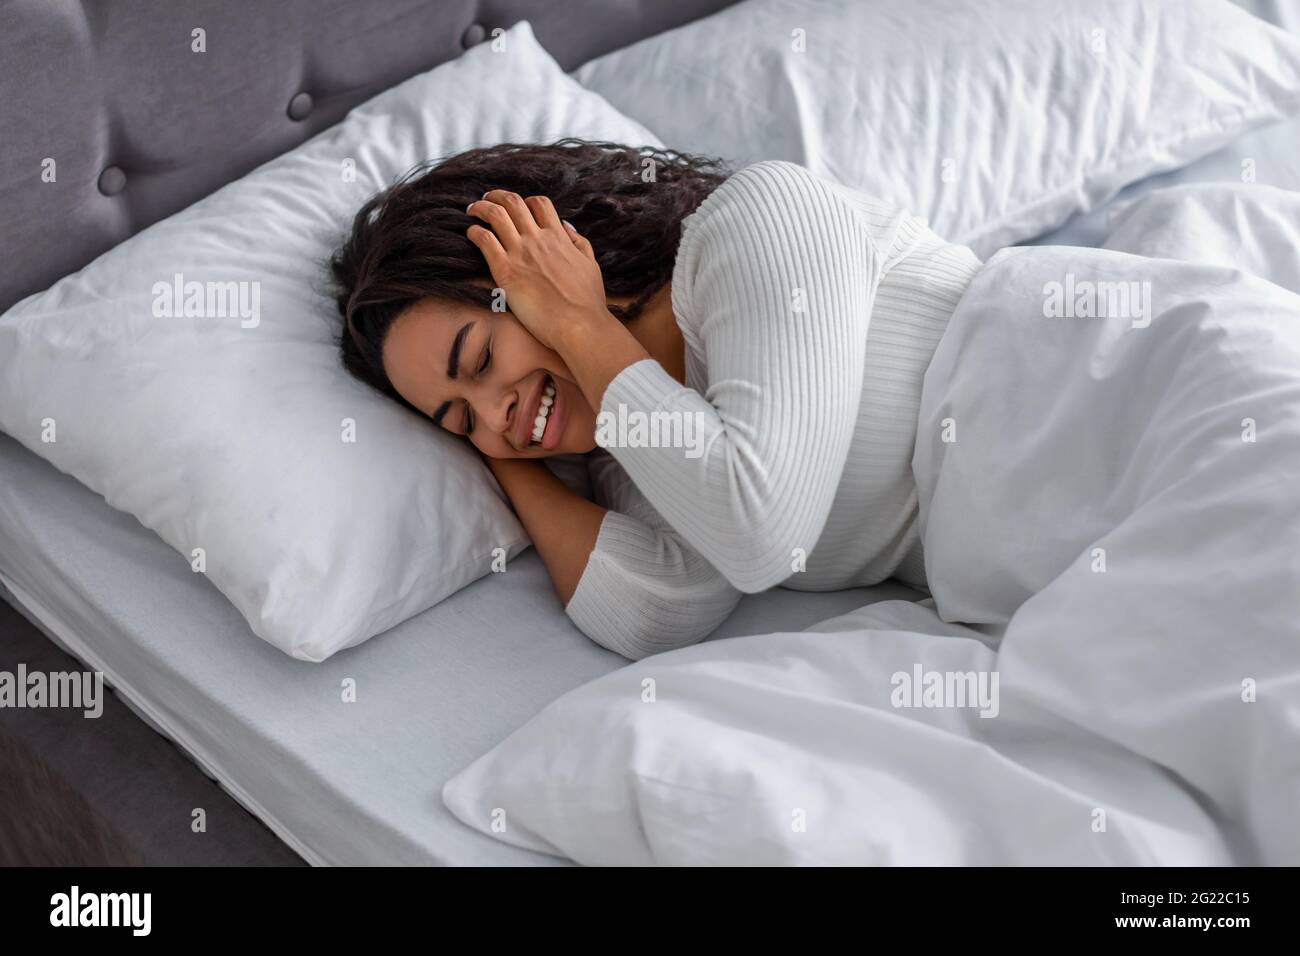 Black woman crying, lying in bed covering face Stock Photo